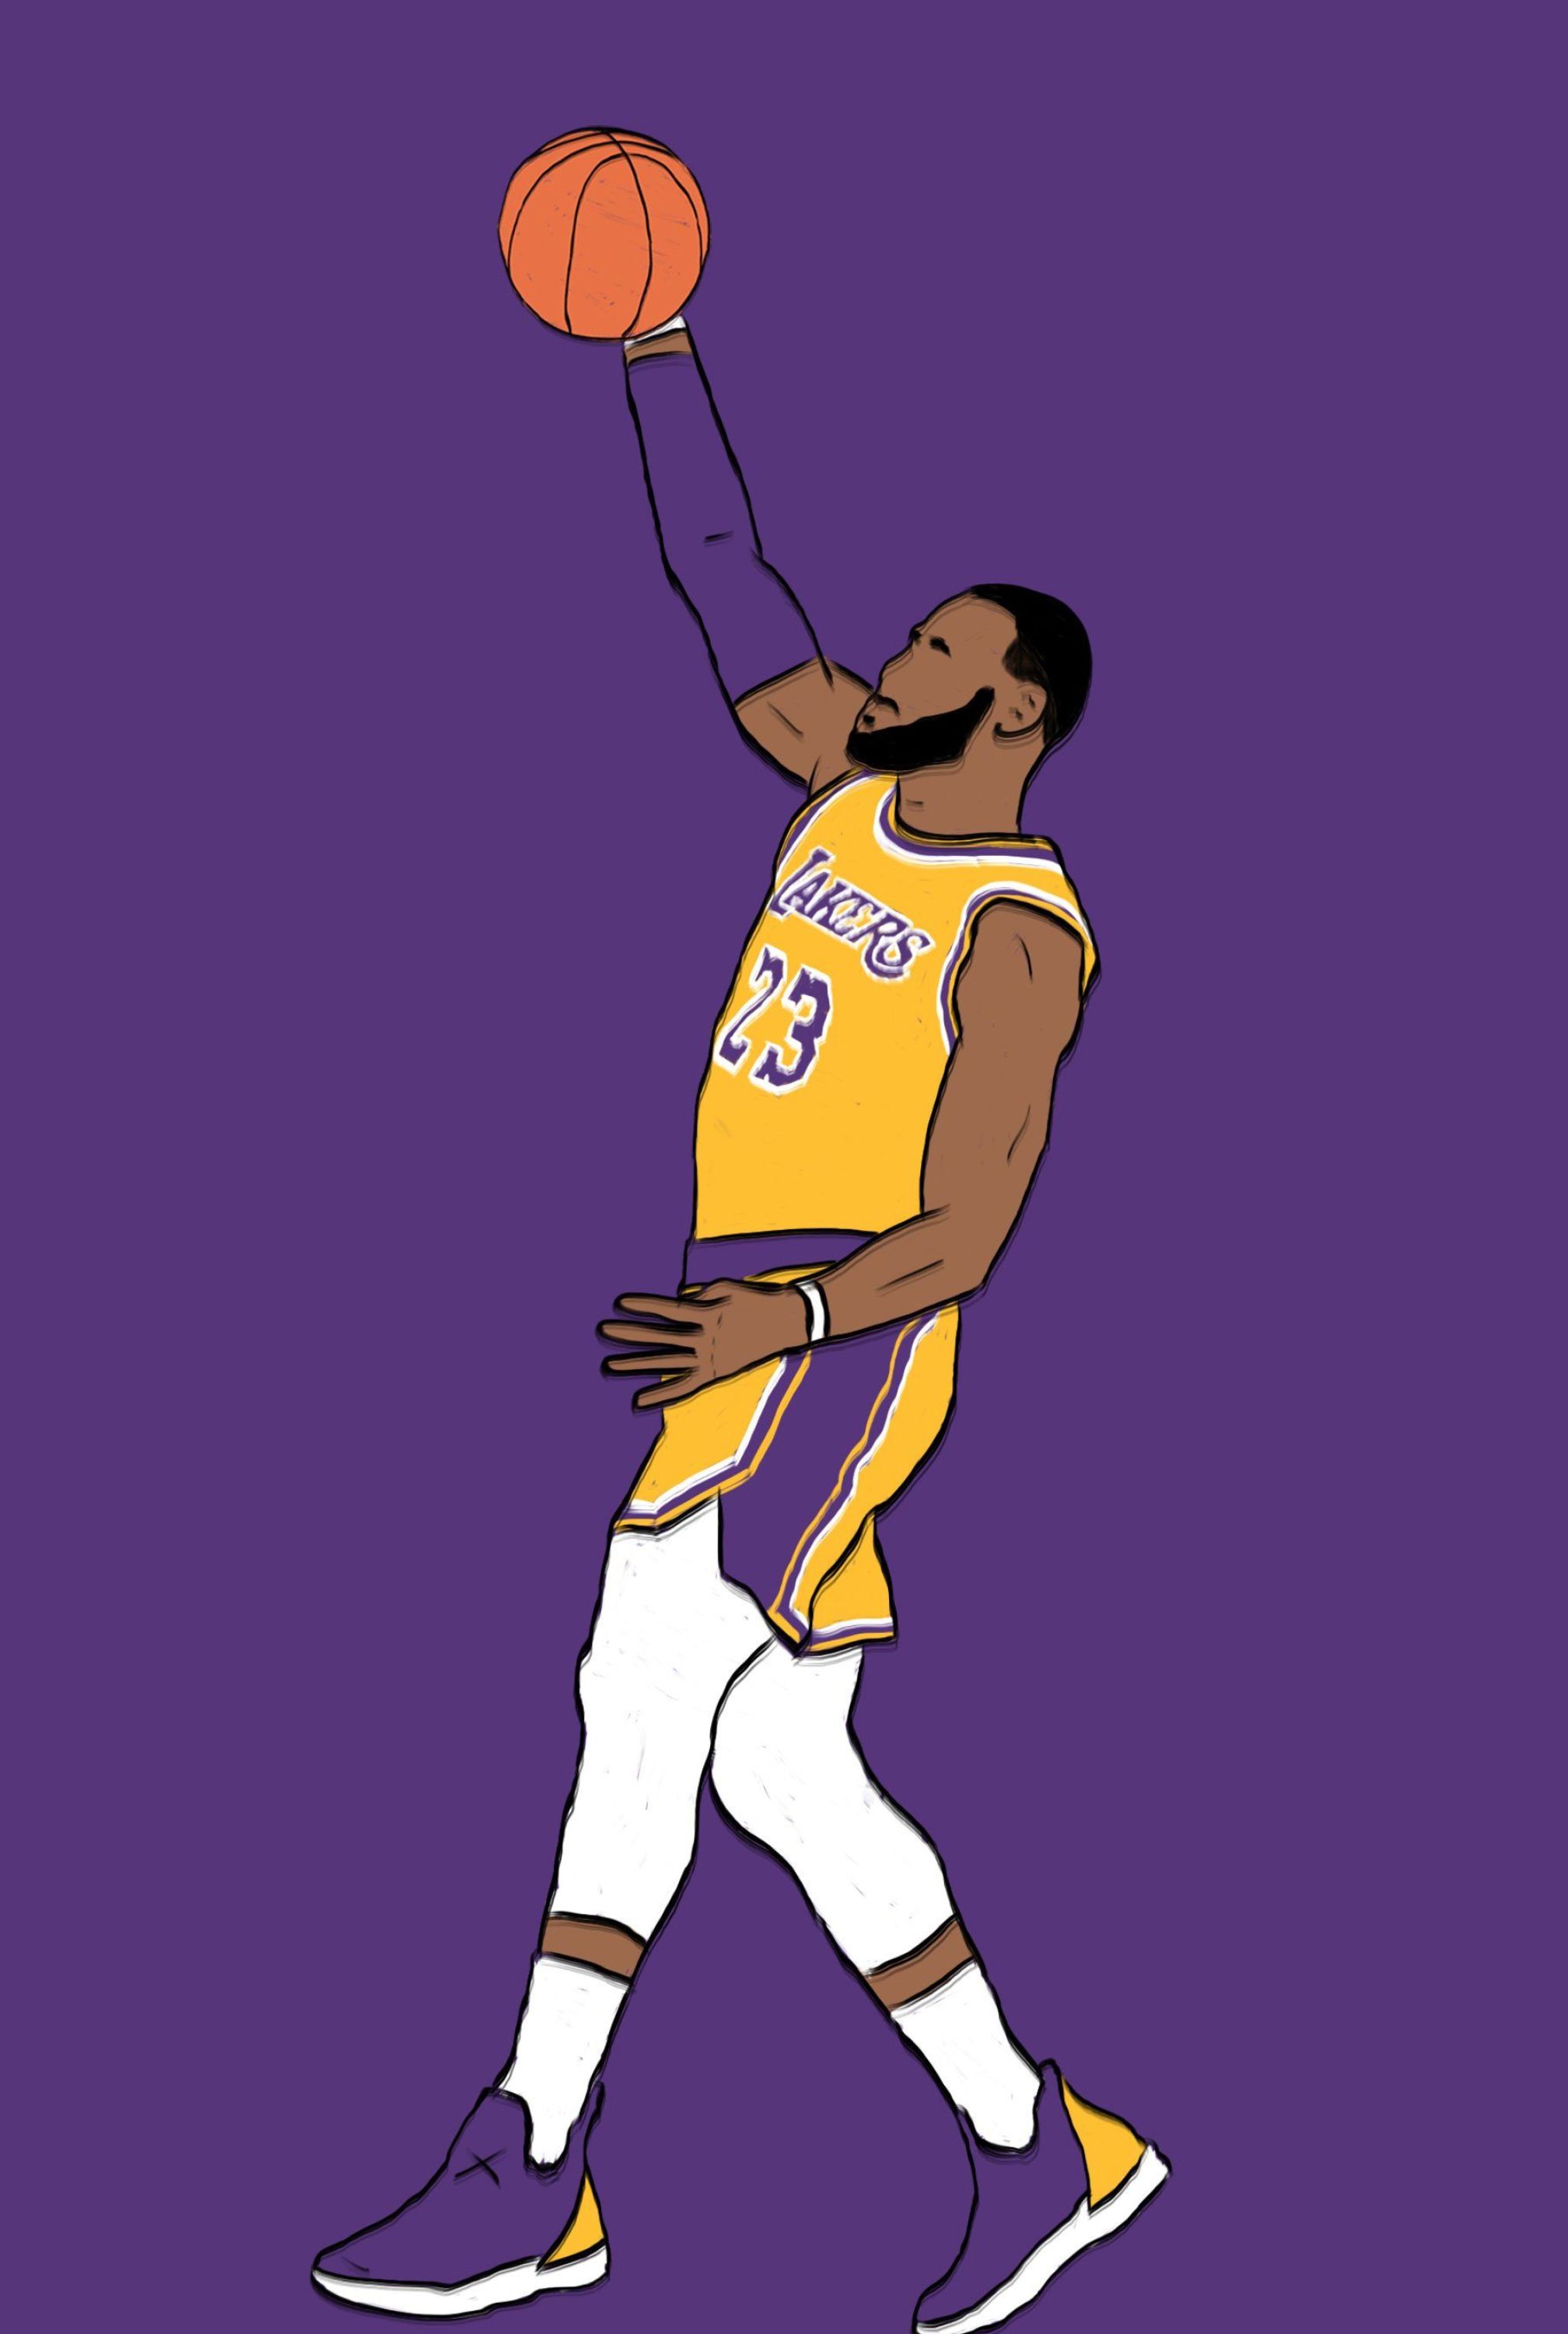 The image of a basketball player in purple and yellow - NBA